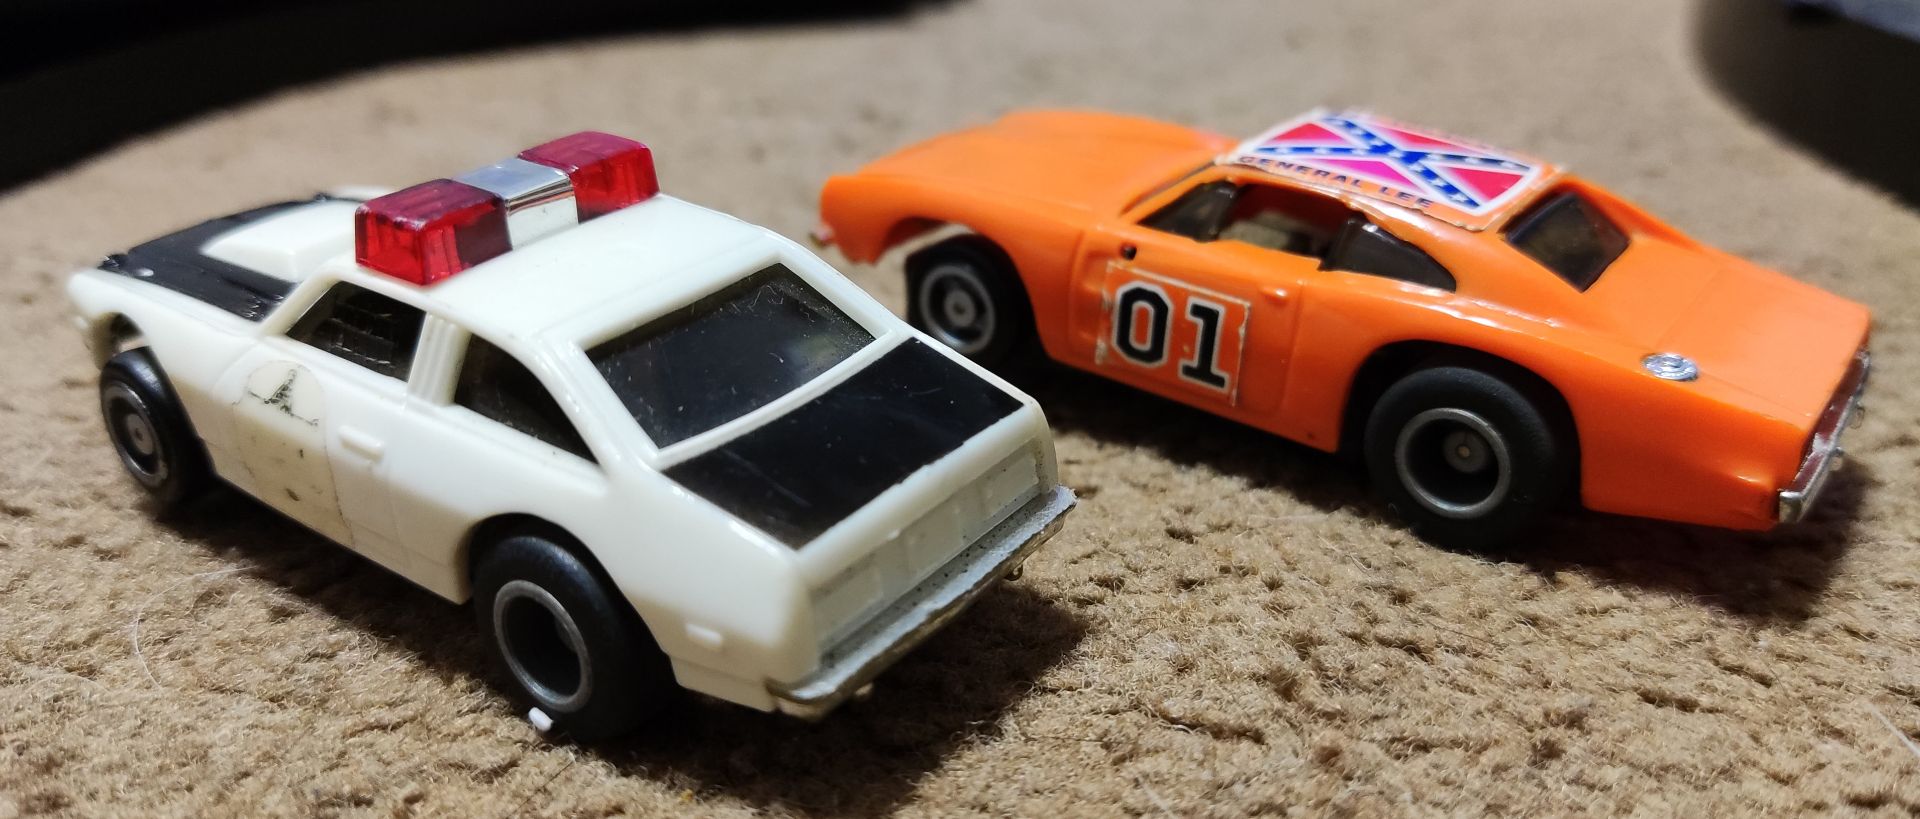 1 x Vintage Dukes of Hazzard Electric Slot Racing Set - Used - CL444 - NO VAT ON THE HAMMER - - Image 13 of 26